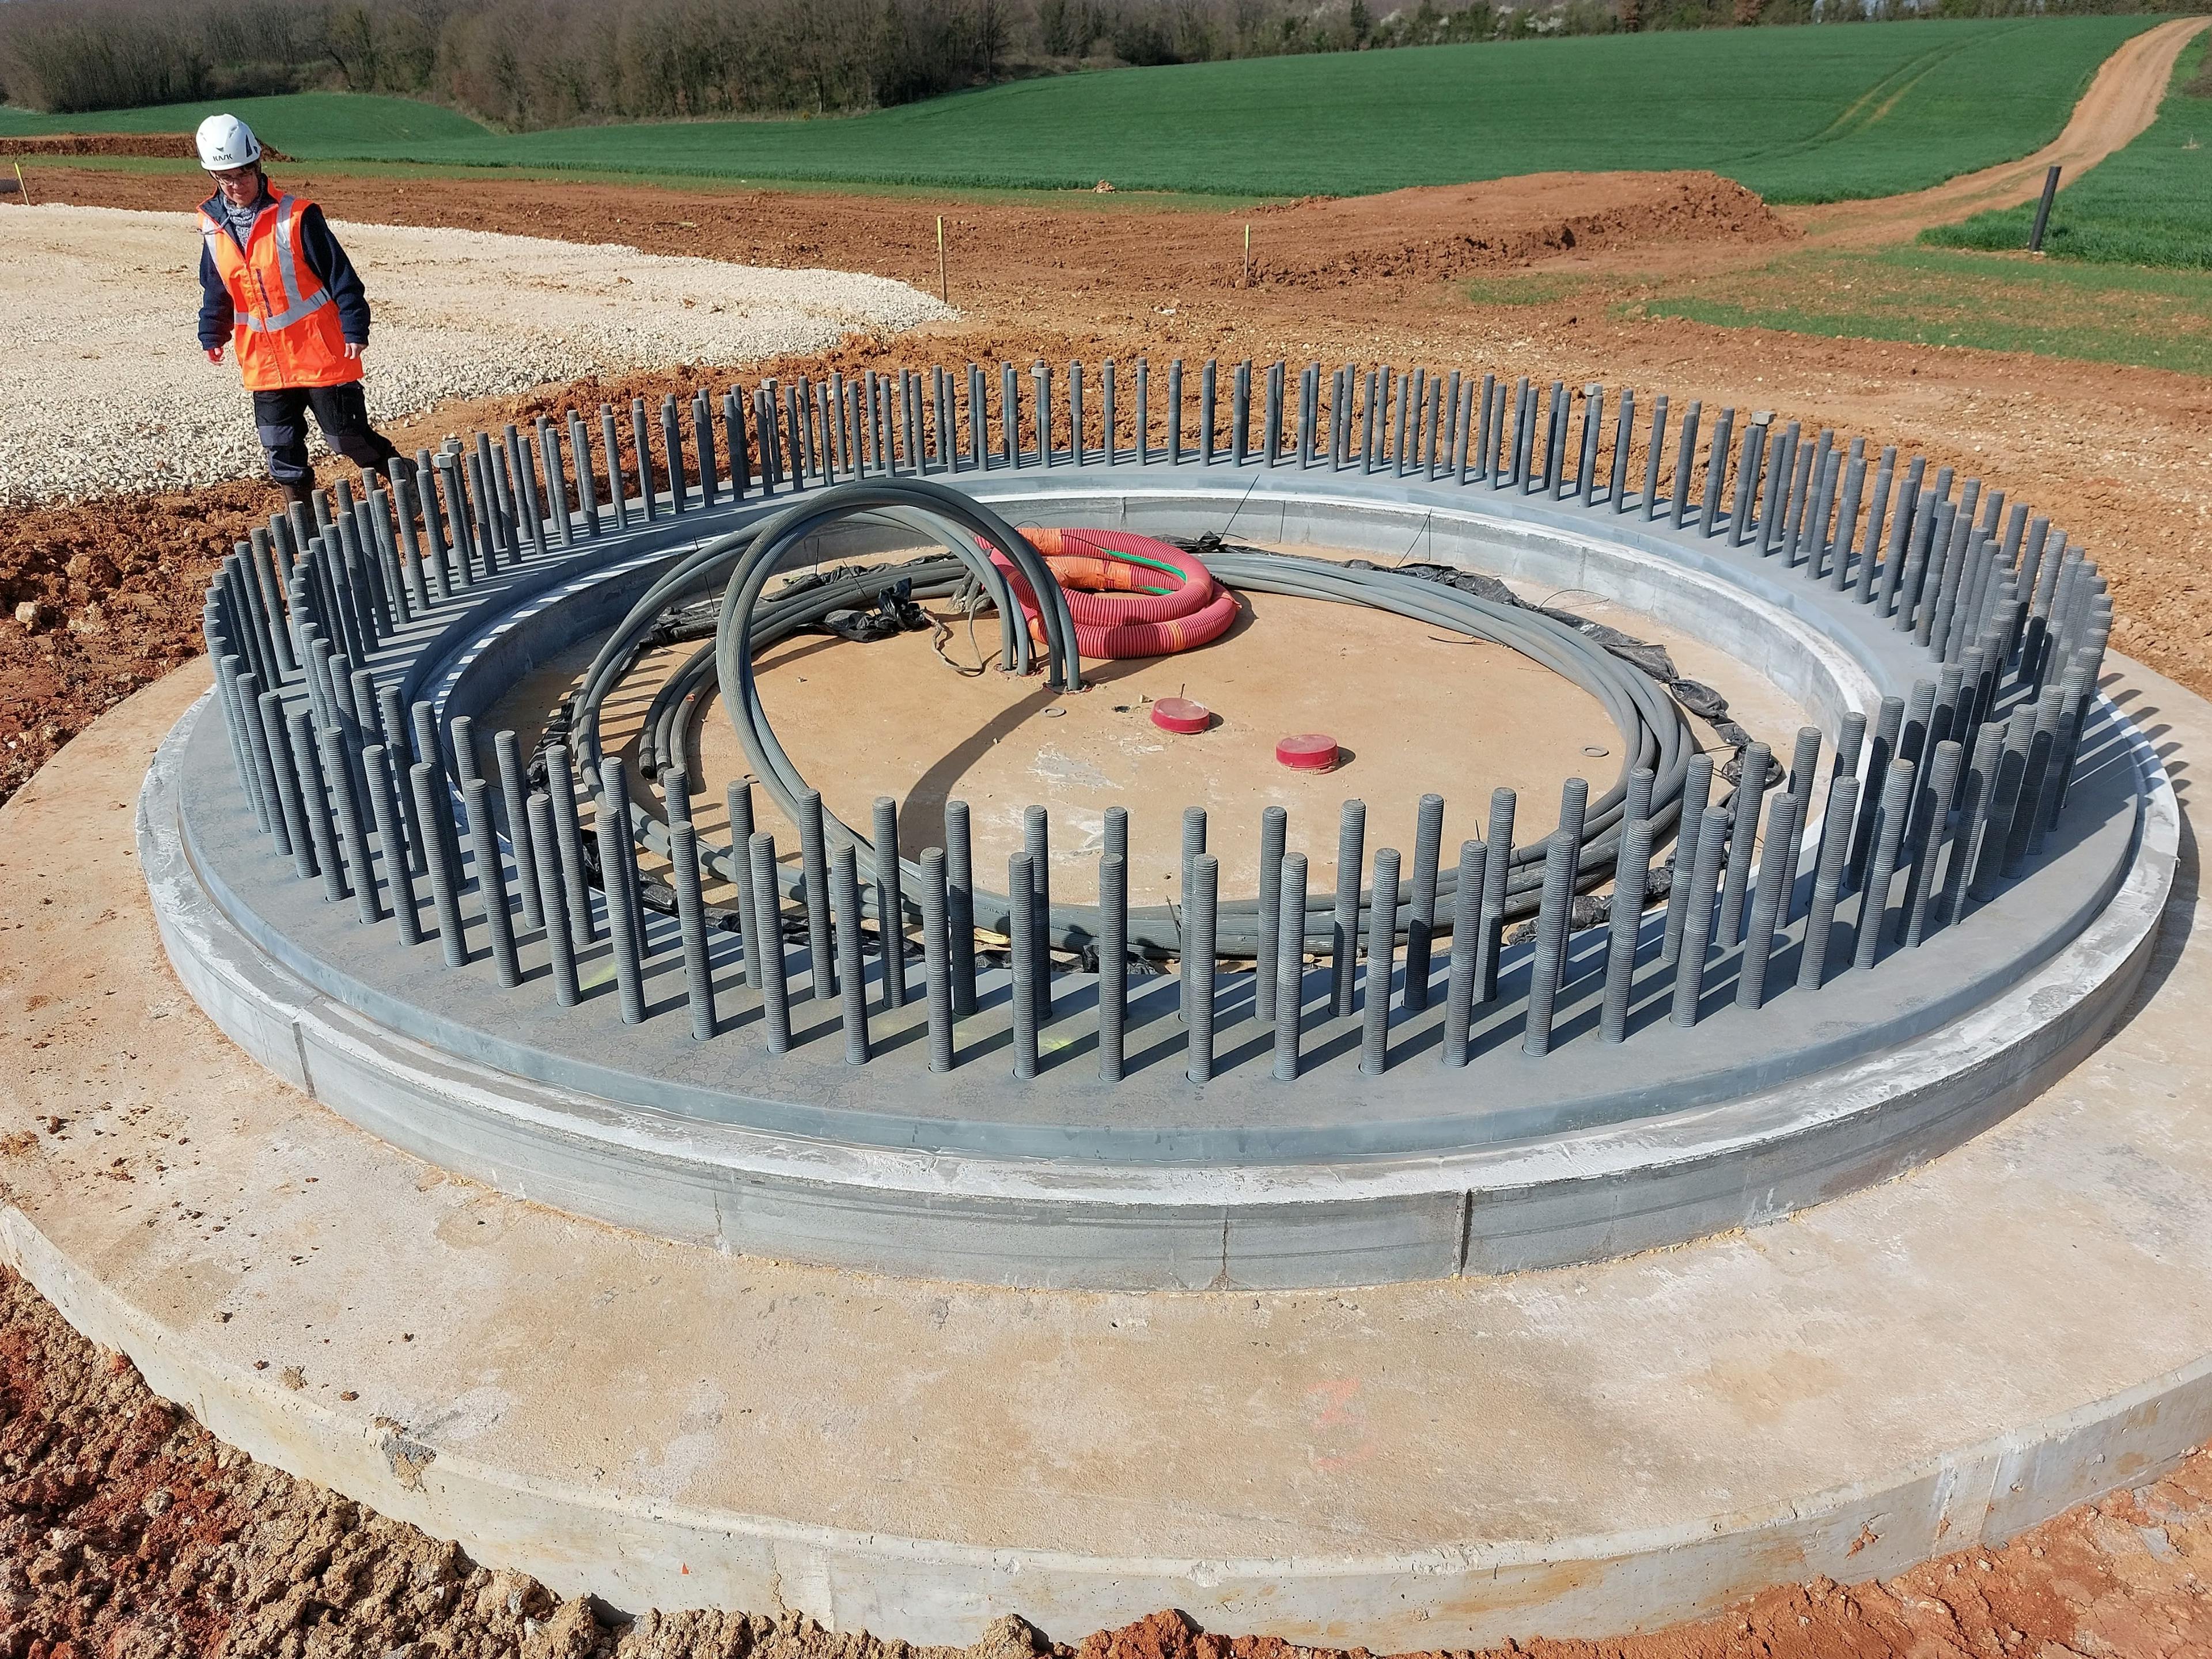 The foundations of a wind turbine under construction